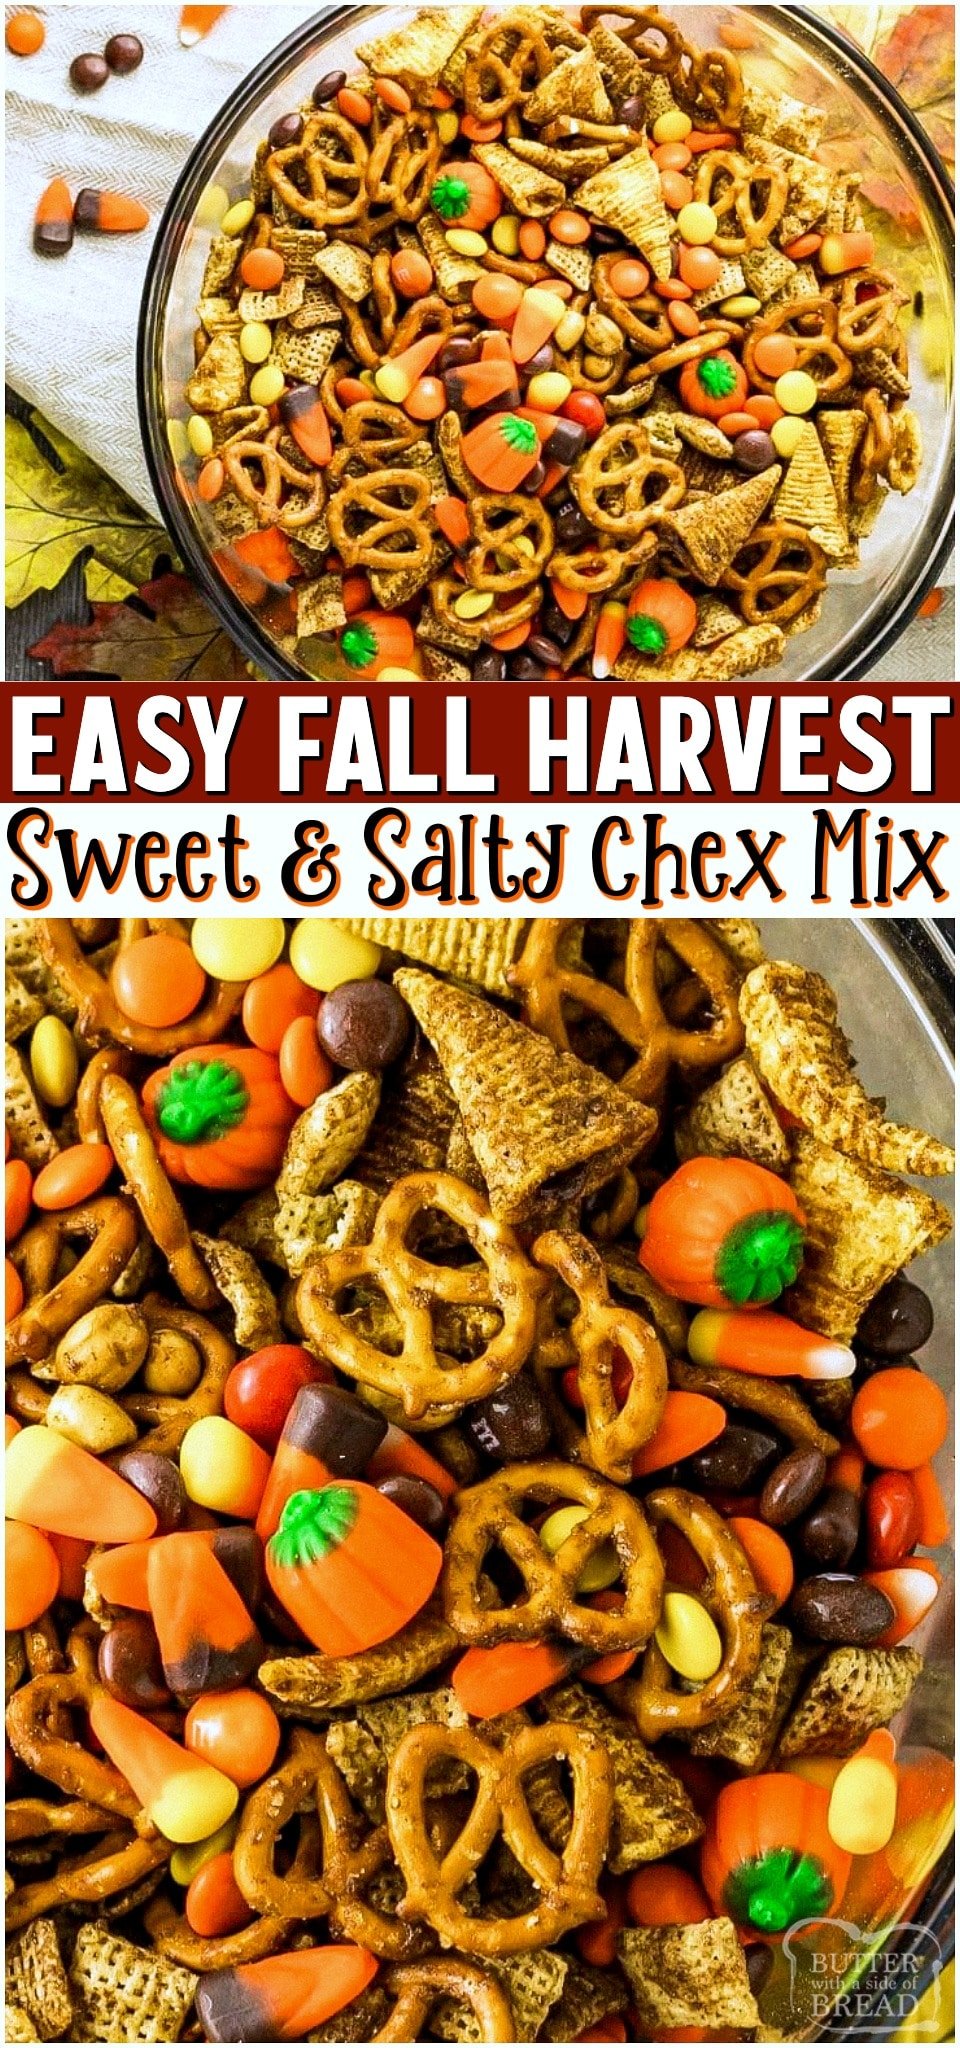 Harvest Chex Mix made with M&M's, pretzels, candy corn & more! Mix tossed in pumpkin spiced butter then baked for the perfect crunch. Perfectly simple sweet & salty Fall treat!